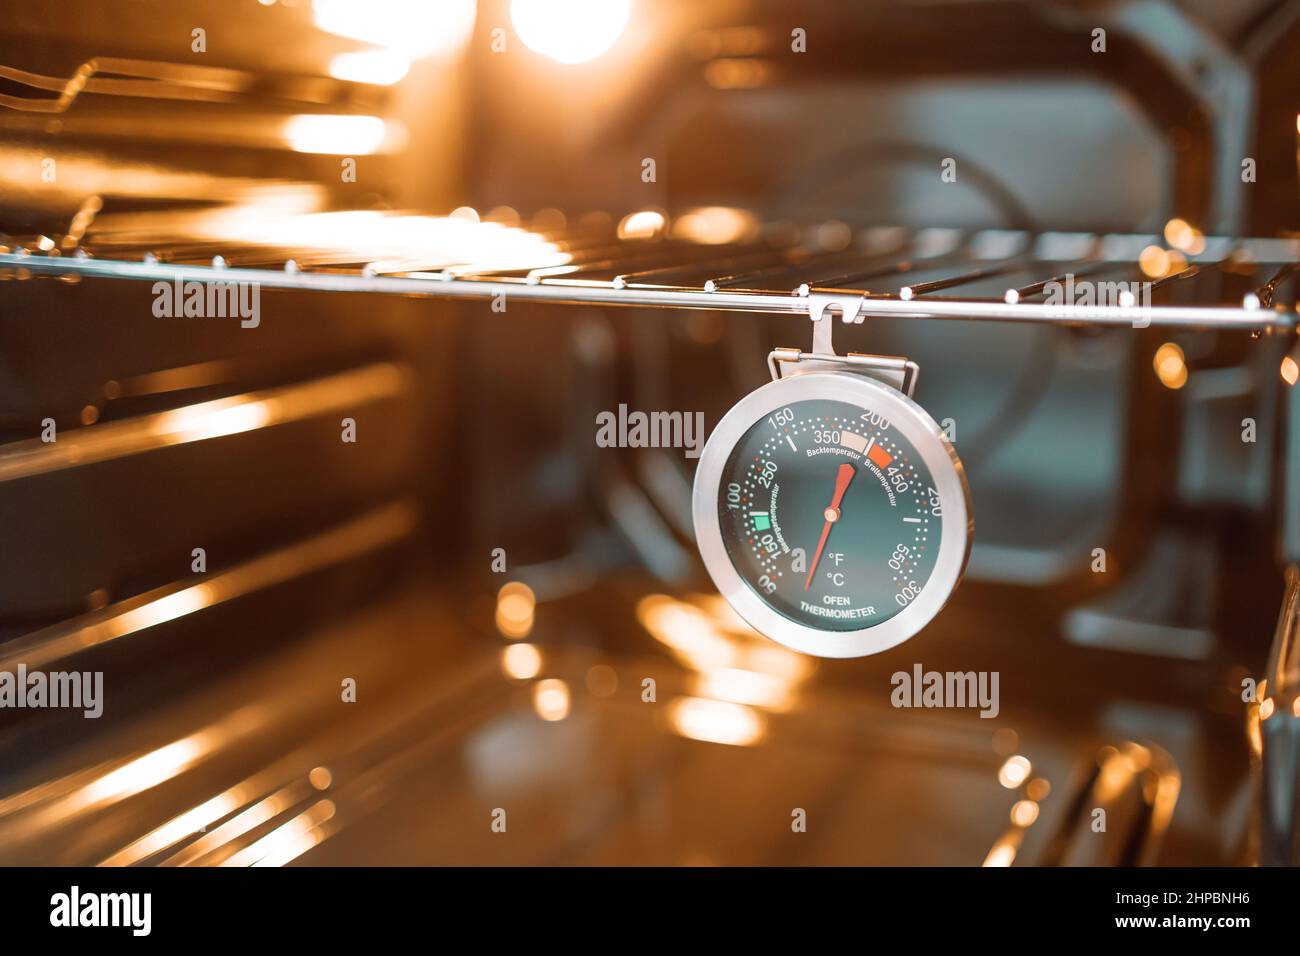 https://c8.alamy.com/comp/2HPBNH6/oven-temperature-for-cooking-in-a-new-gas-oven-2HPBNH6.jpg